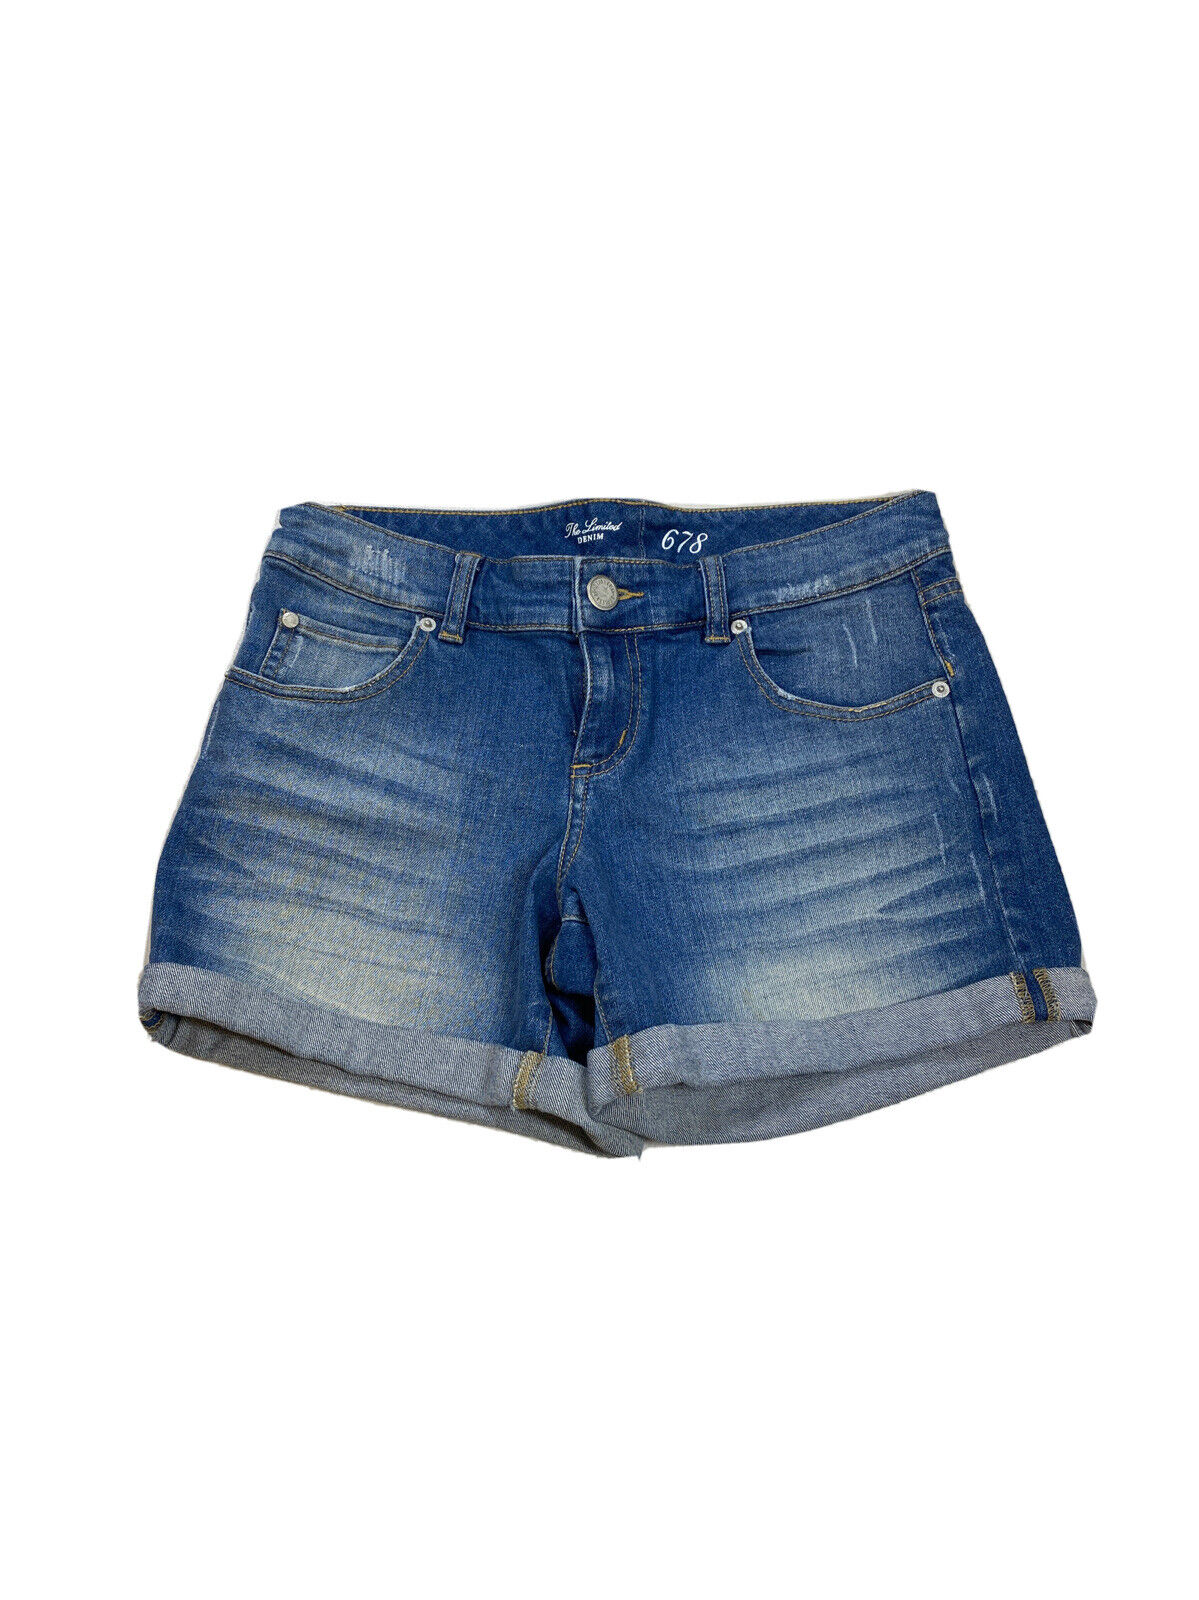 The Limited Women's Medium Wash 678 Denim Jean Shorts - 6 – The Resell Club